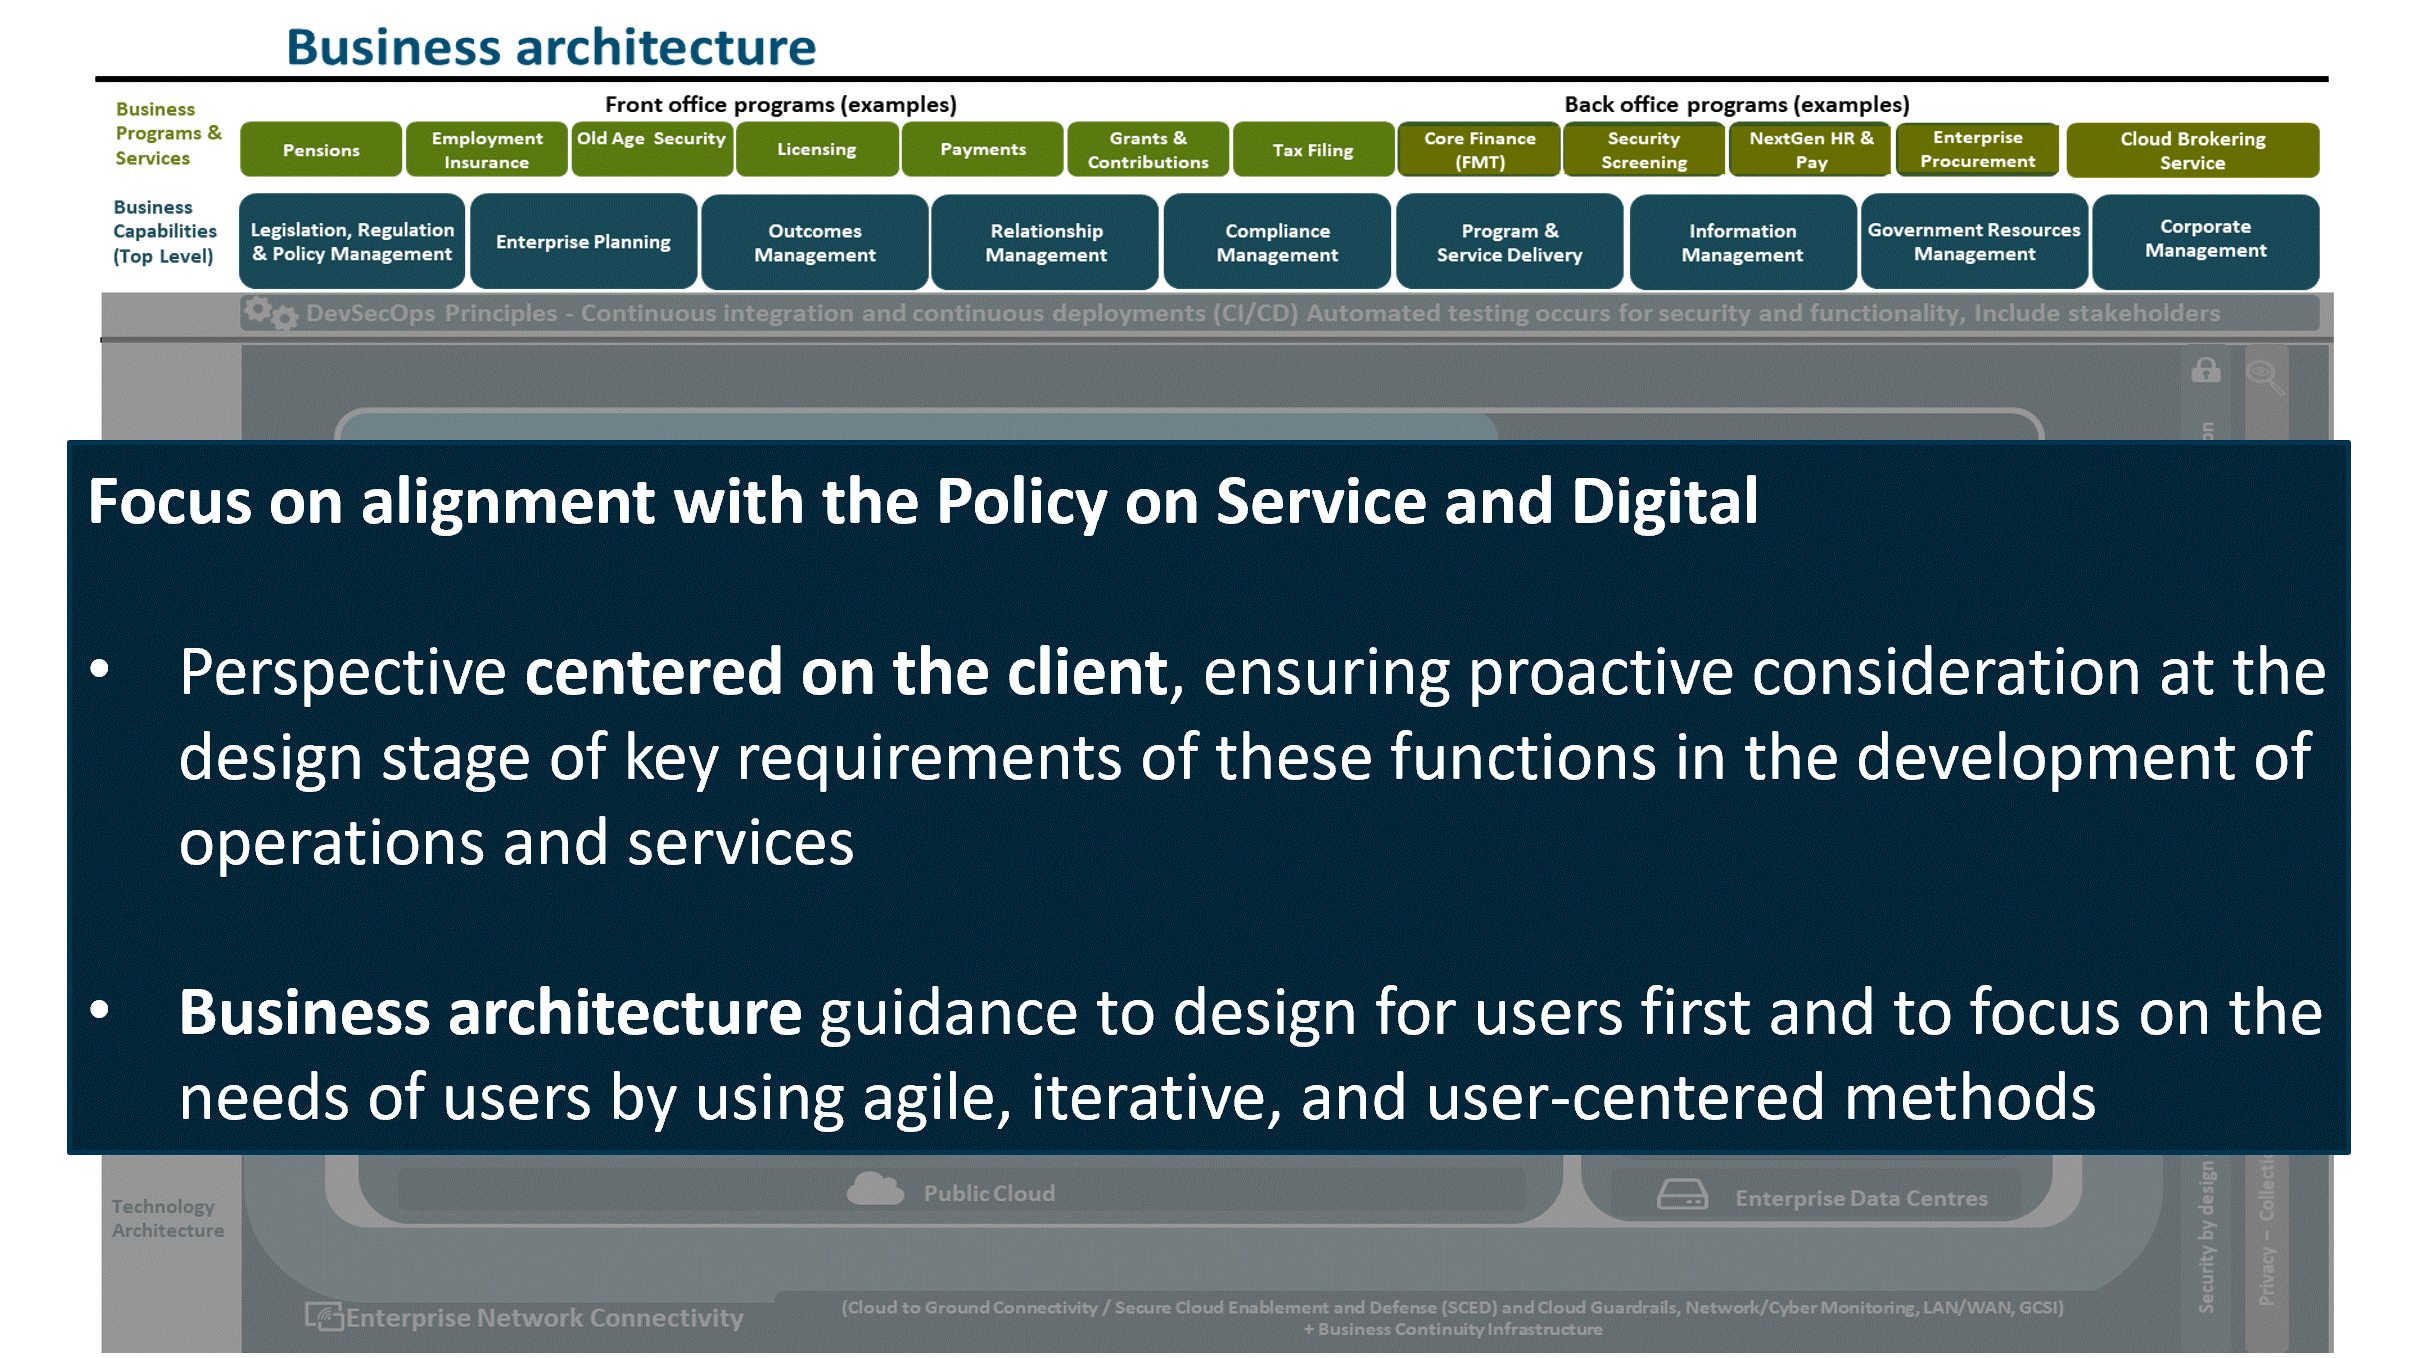 Service and Digital business architecture.gif